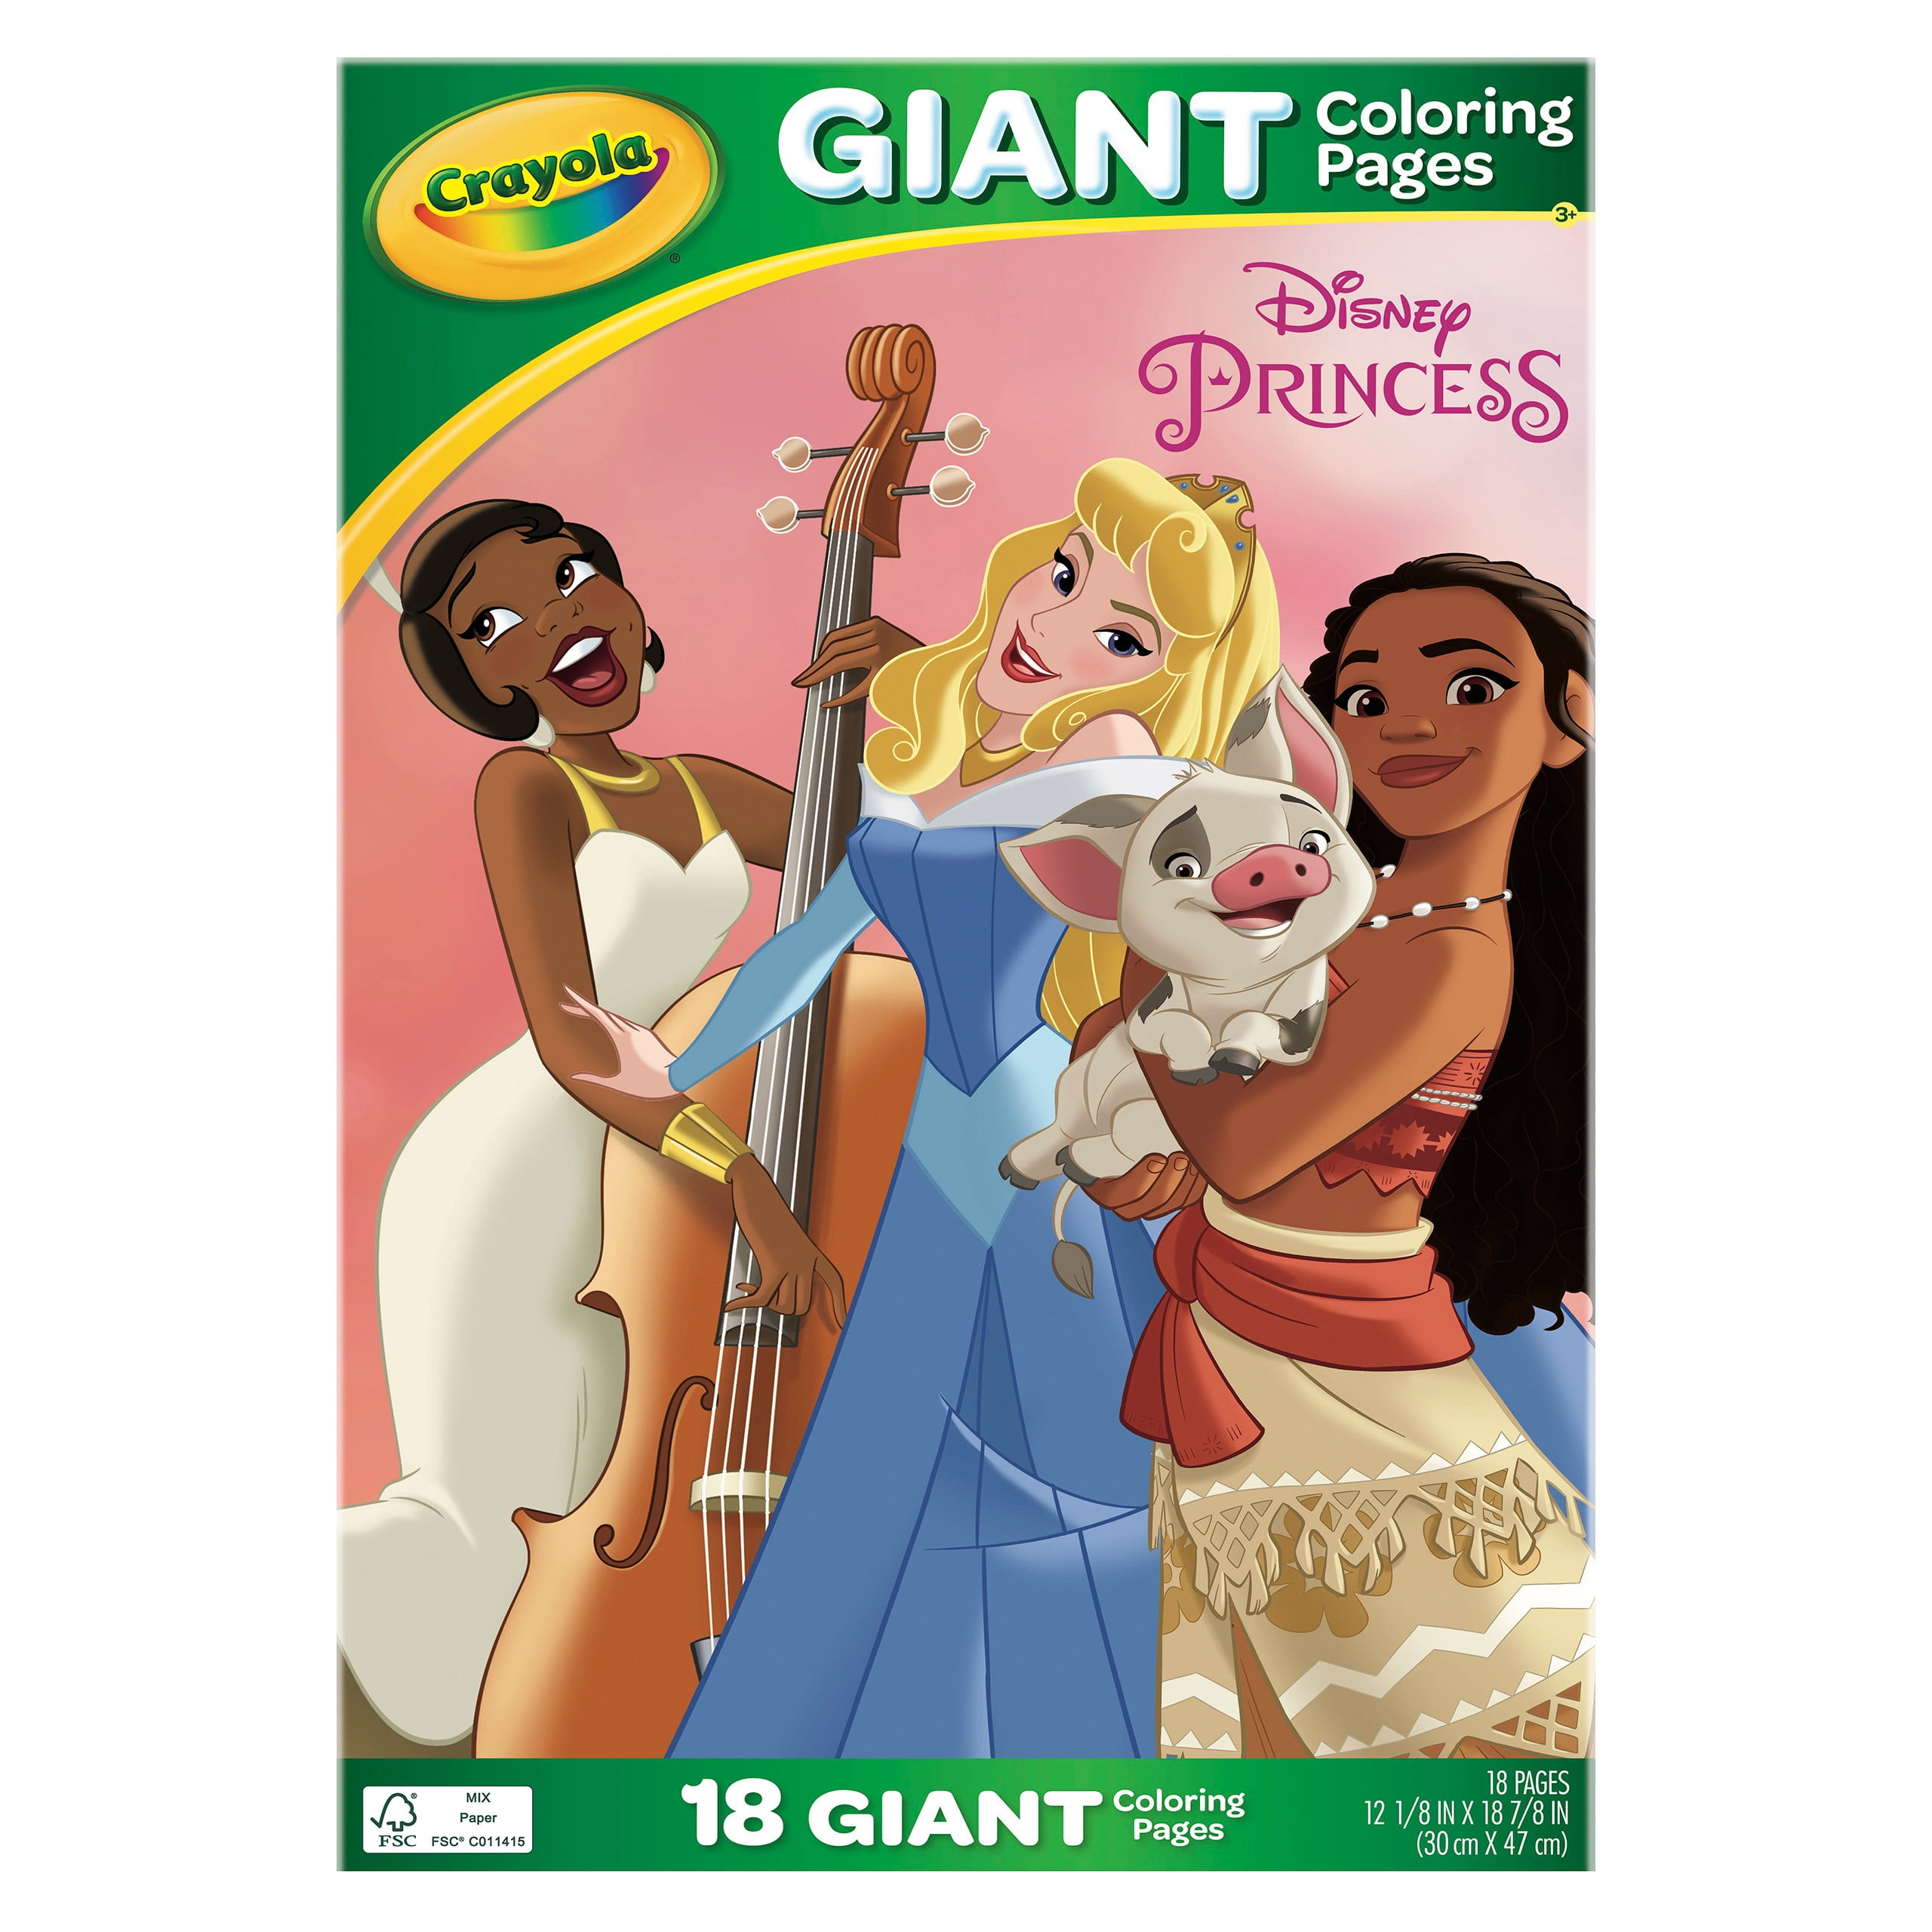 Crayola giant coloring pages disney princess child pages gifts for boys girls